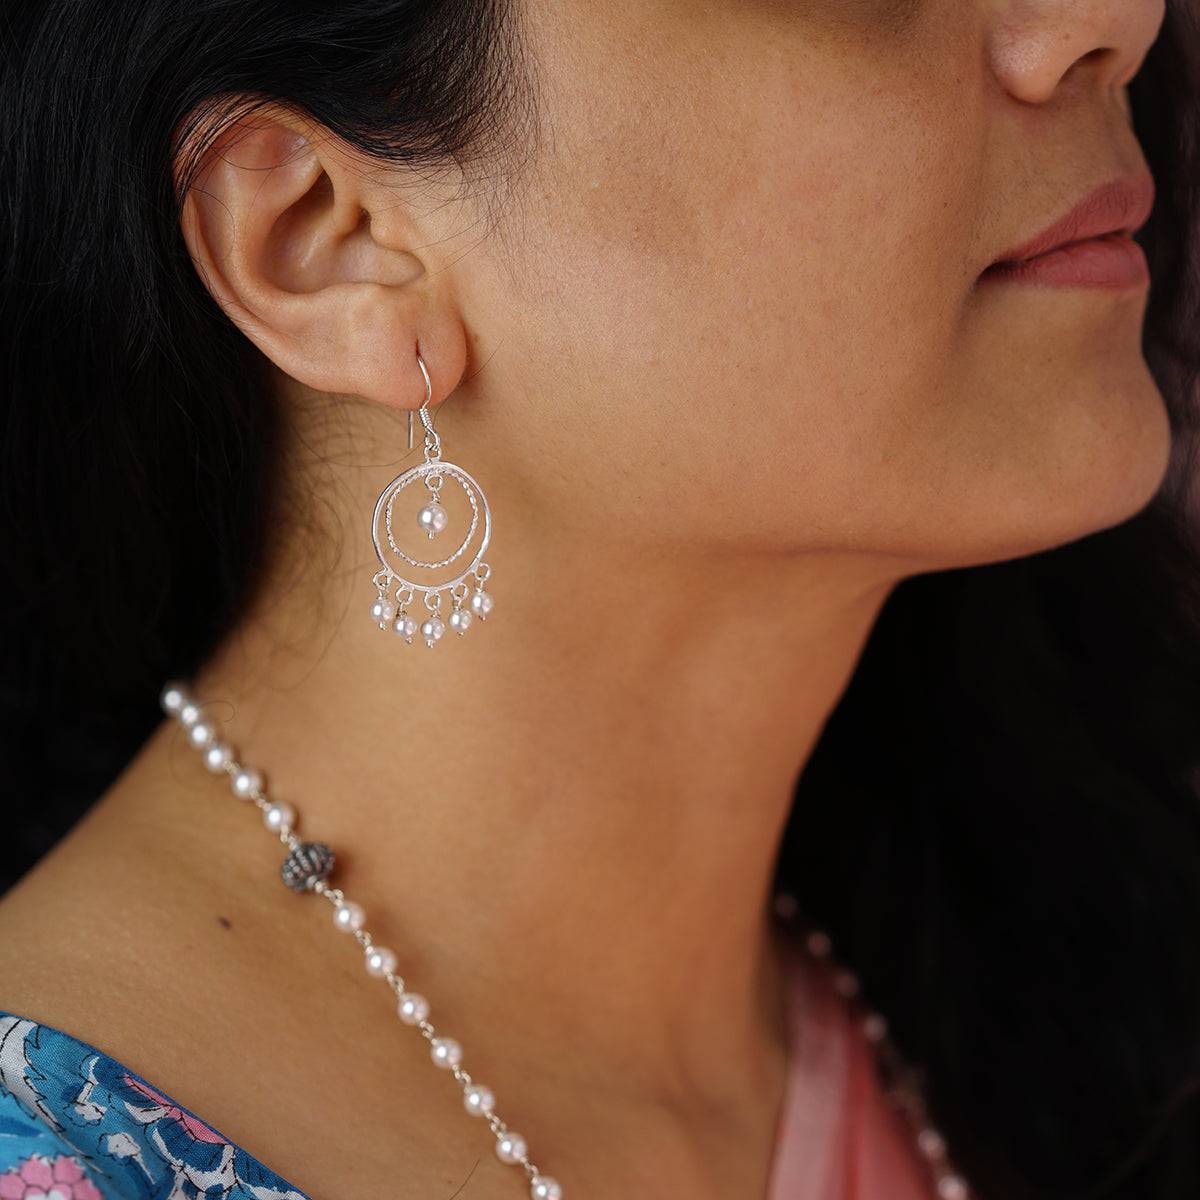 a close up of a woman wearing a necklace and earrings